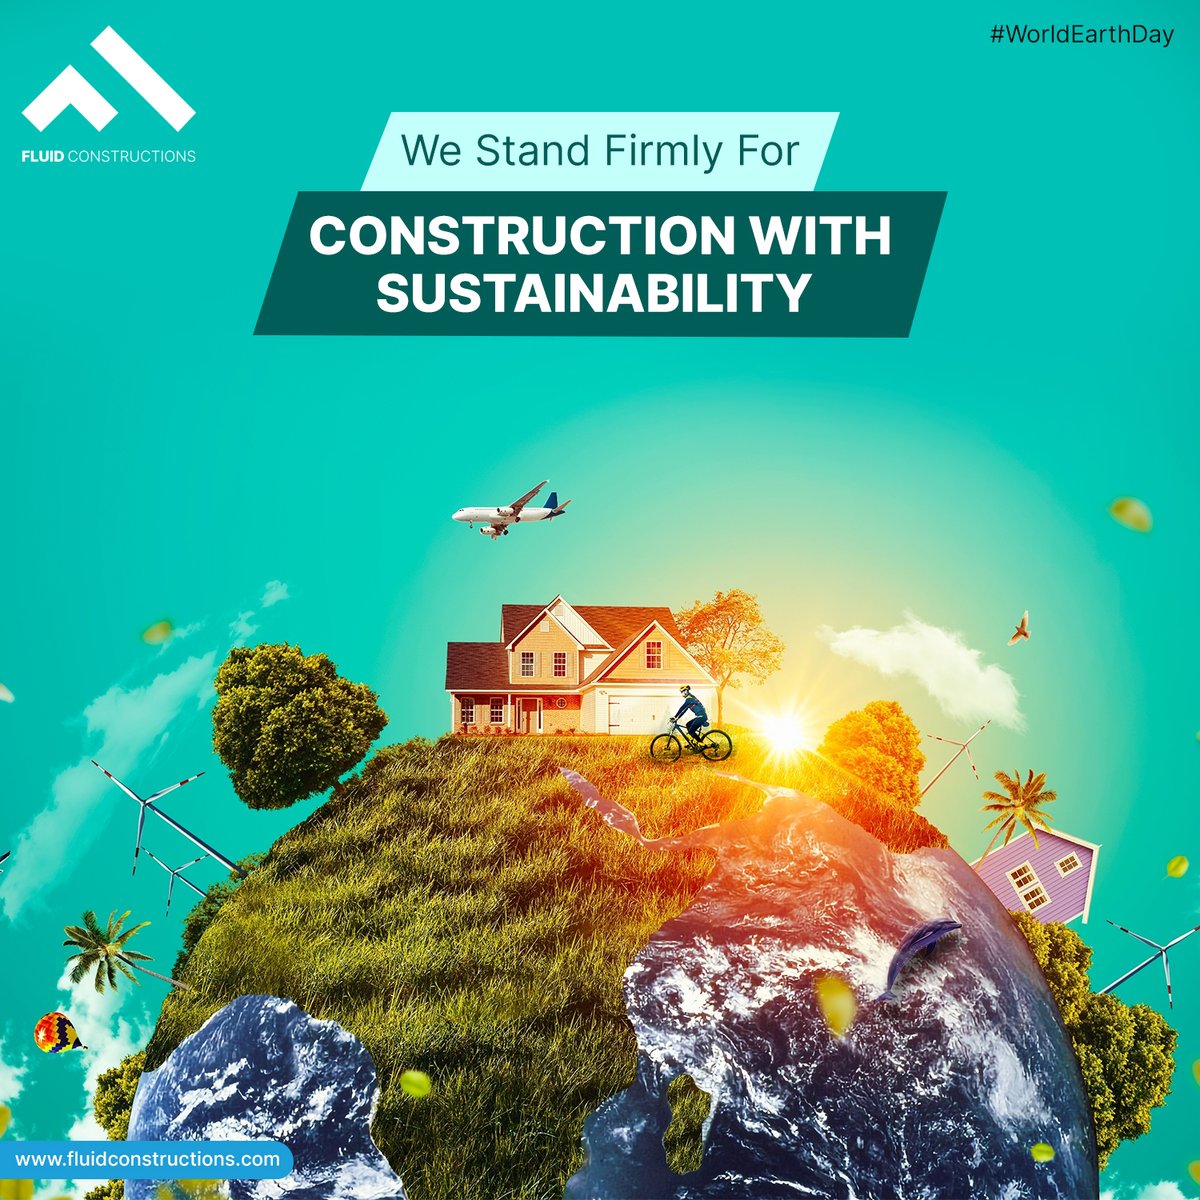 Join us in celebrating World Earth Day 🌎 as we stick to sustainable construction practices to build a greener tomorrow!

#worldearthday #earthday #ProtectOurPlanet #ClimateAction #Sustainability #GoGreen
#SaveOurEarth #fluidconstructions